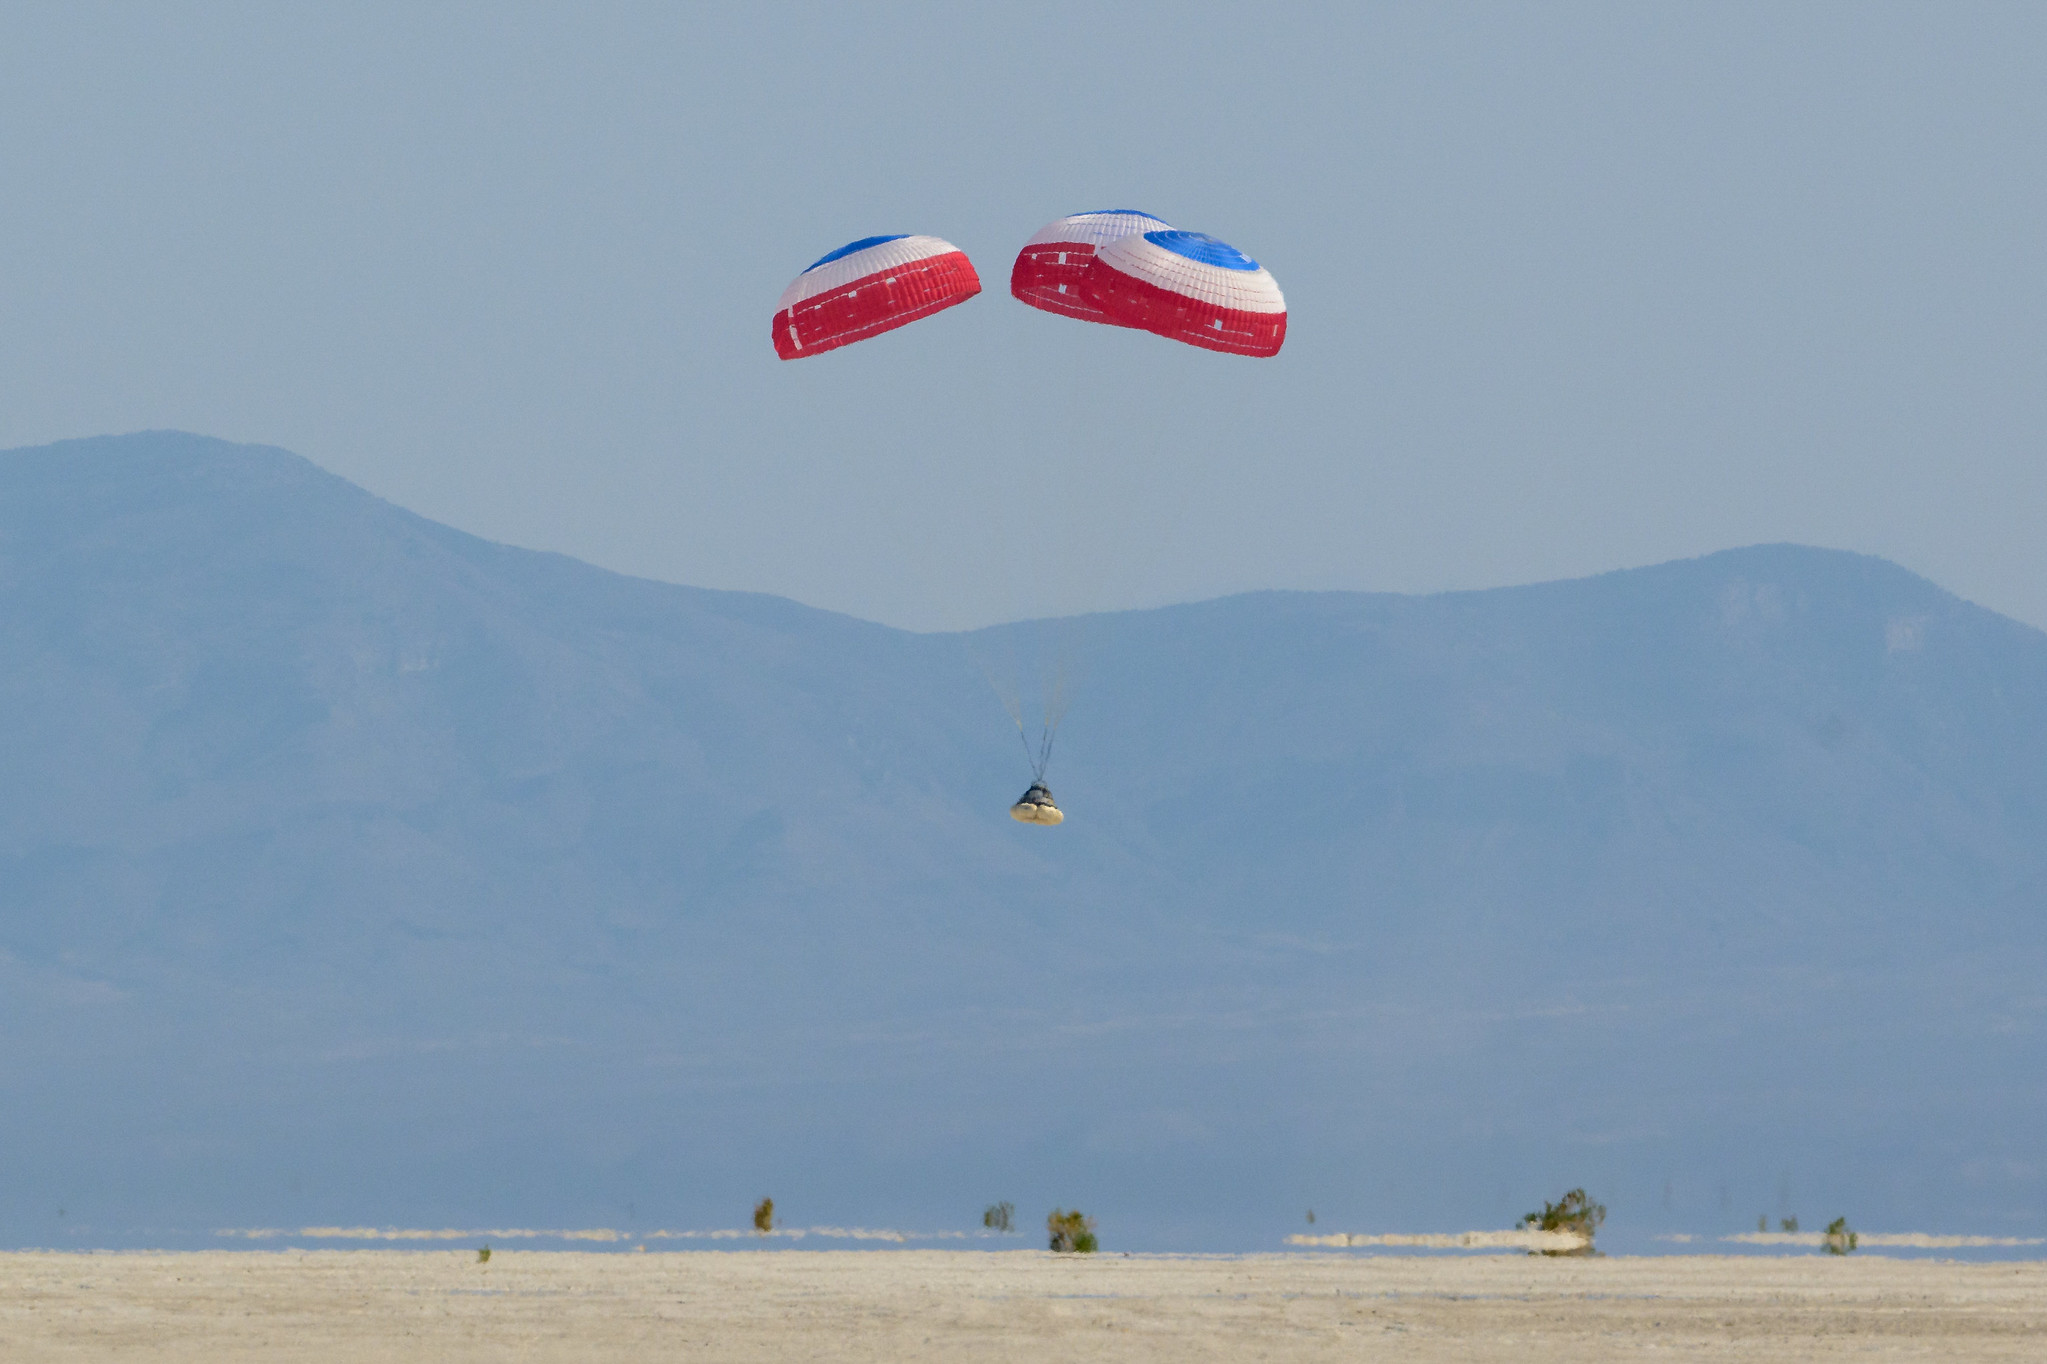 Boeing's Starliner capsule tumbles to a safe landing at White Sands Missile Range in New Mexico on May 25, 2022.